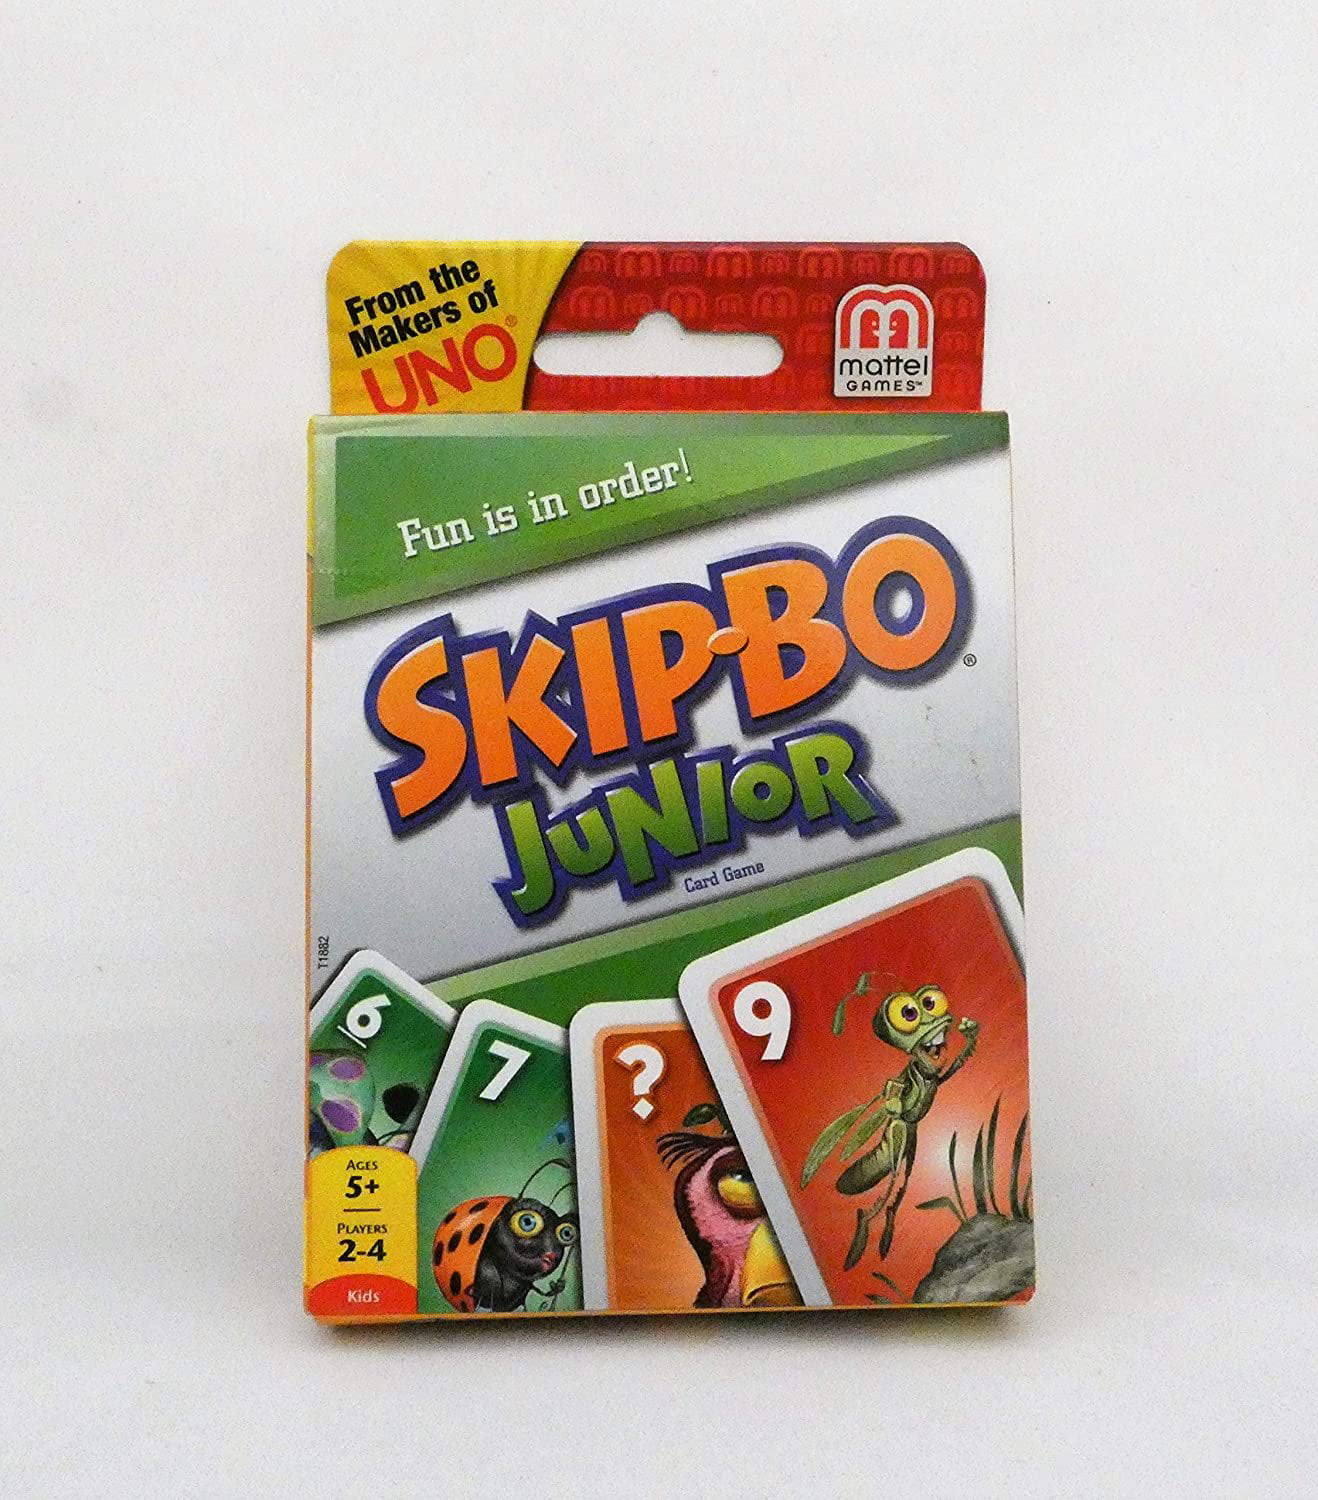 Mattel Games UNO:SKIP BO Card Game Multiplayer UNO Card Game Family Party  Games Toys Kids Toy